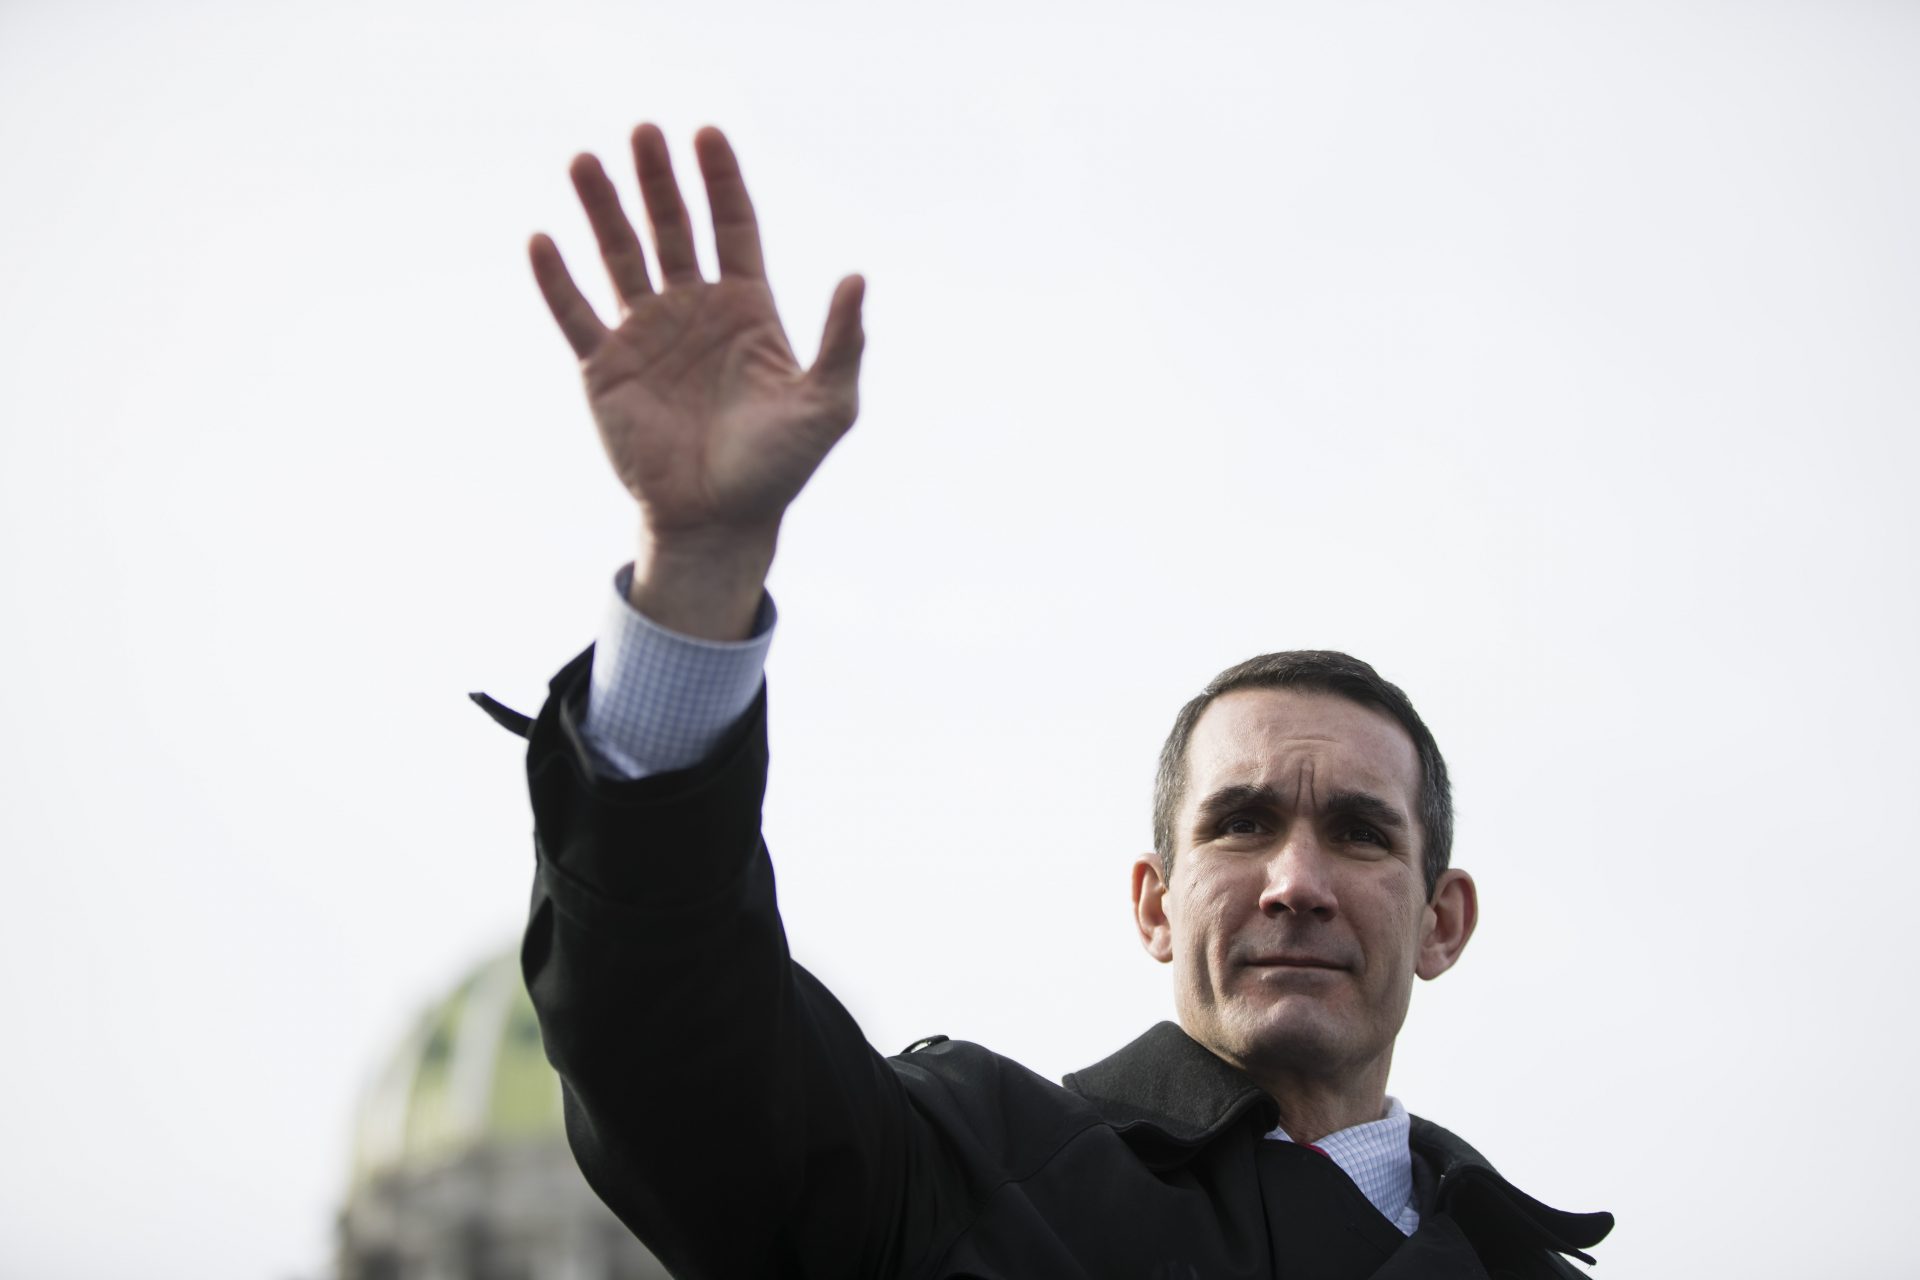 Pennsylvania Auditor General Eugene DePasquale, before Pennsylvania Gov. Tom Wolf takes the oath of office for his second term, on Tuesday, Jan. 15, 2019, at the state Capitol in Harrisburg, Pa.